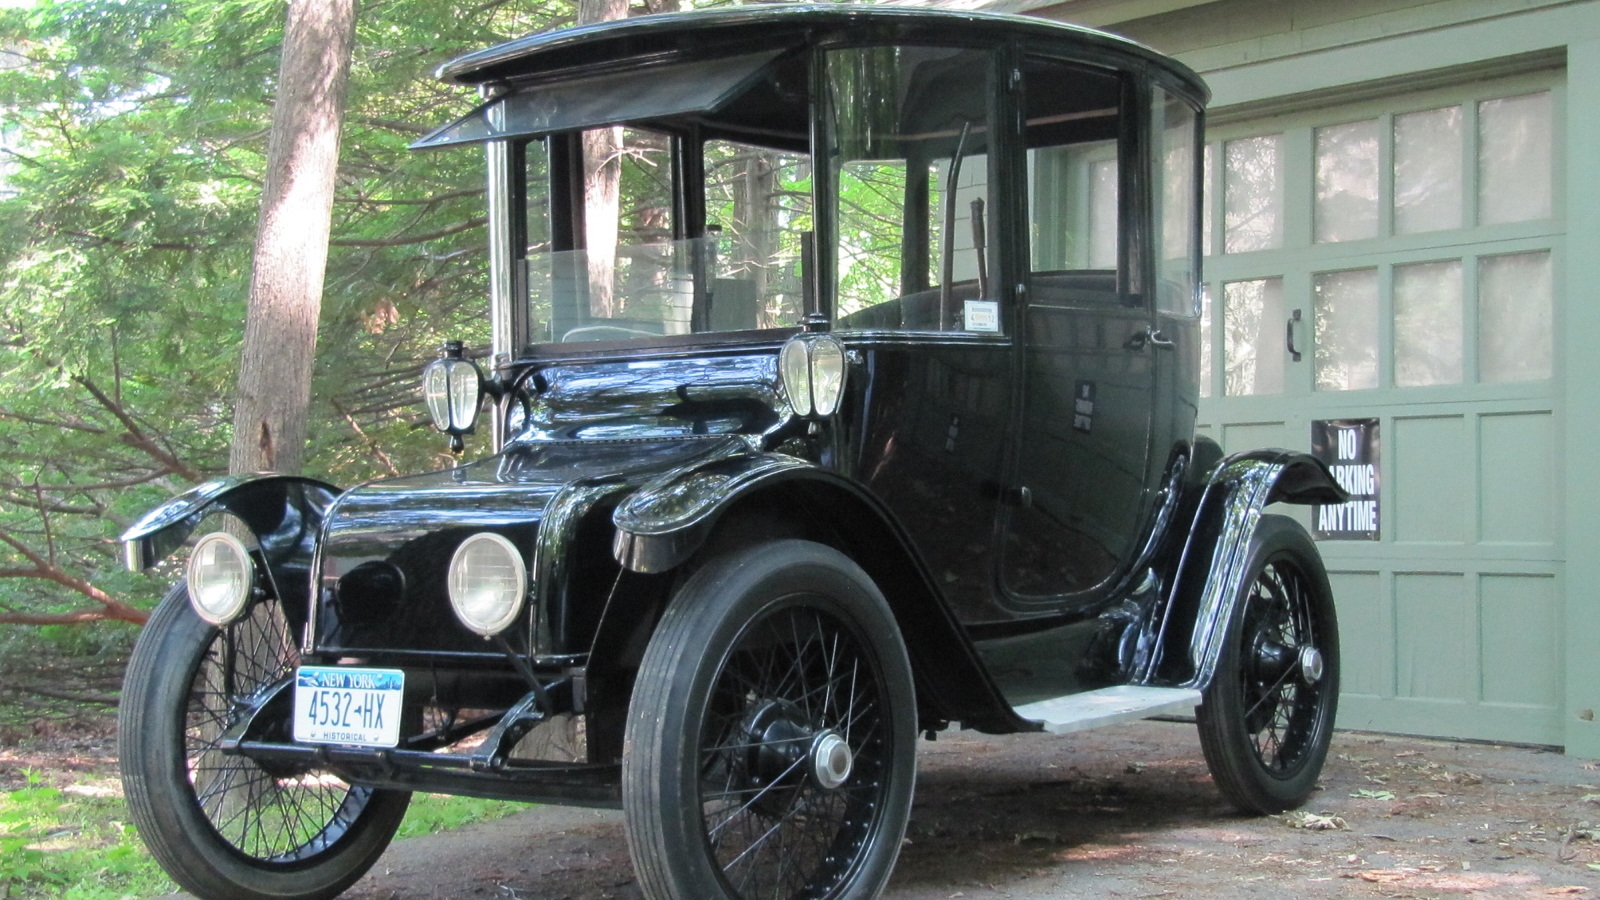 1914 Detroit Electric car, owned by GE scientist Charles Steinmetz, Schenectady, NY, June 2011